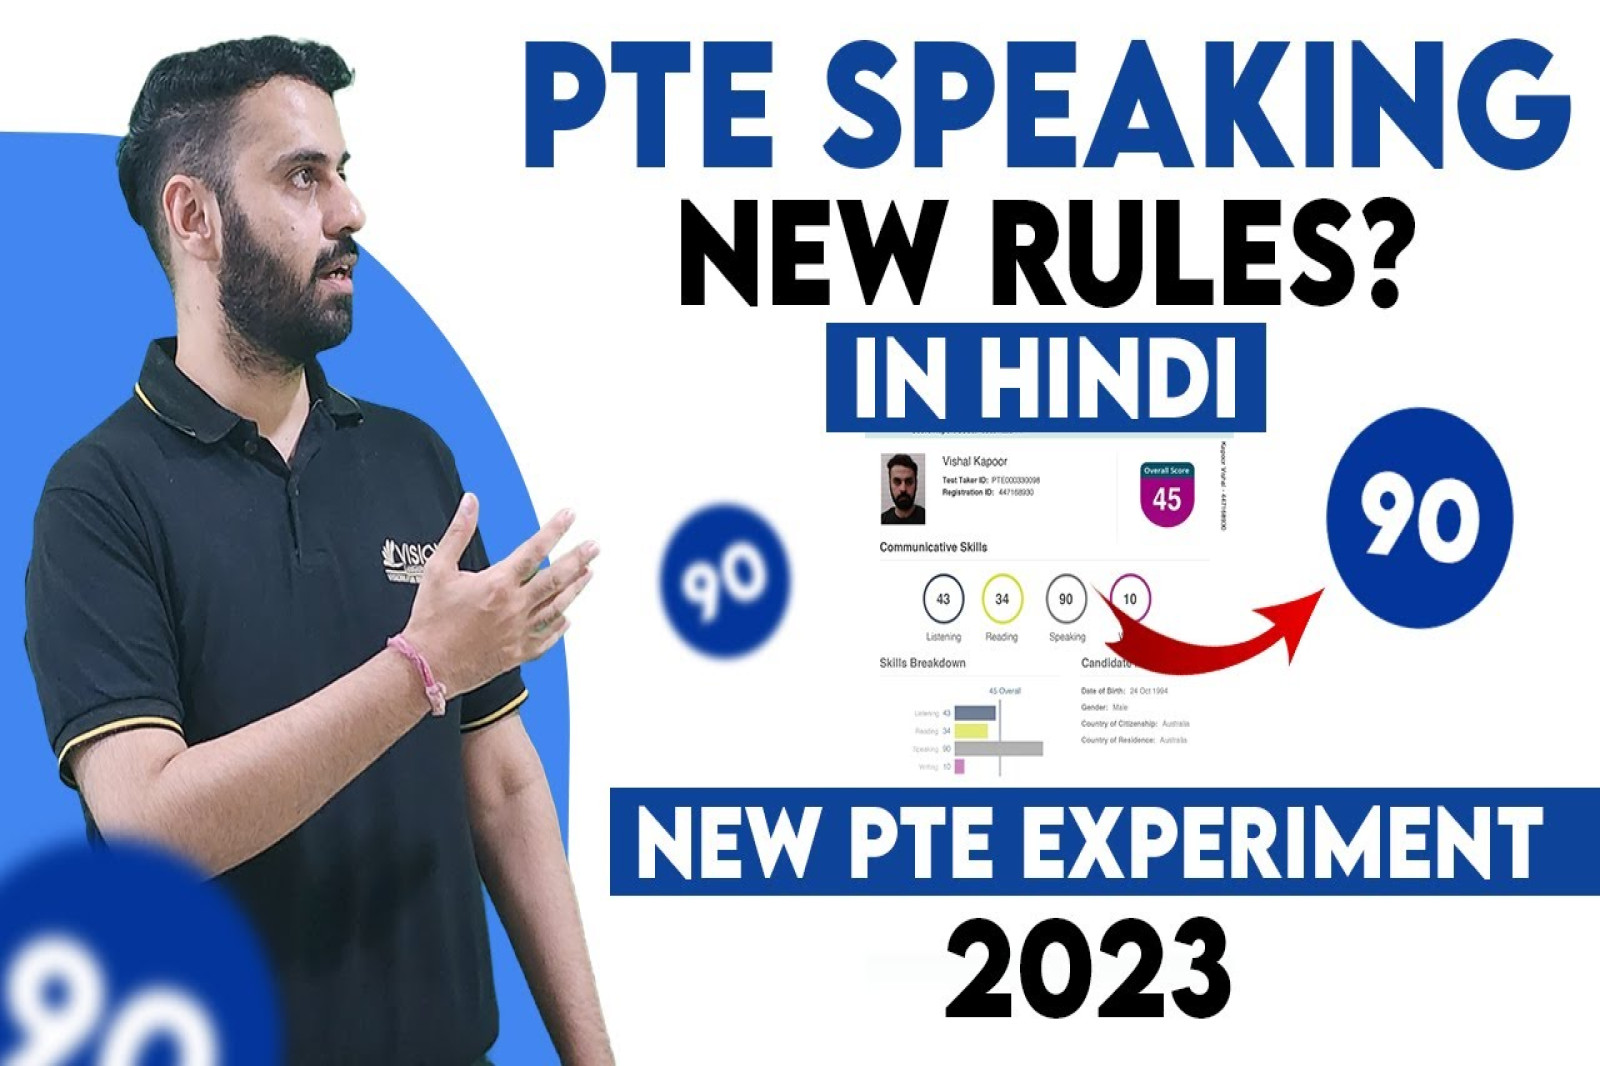 PTE Speaking New Rules | New PTE Experiment 2023 (Hindi)